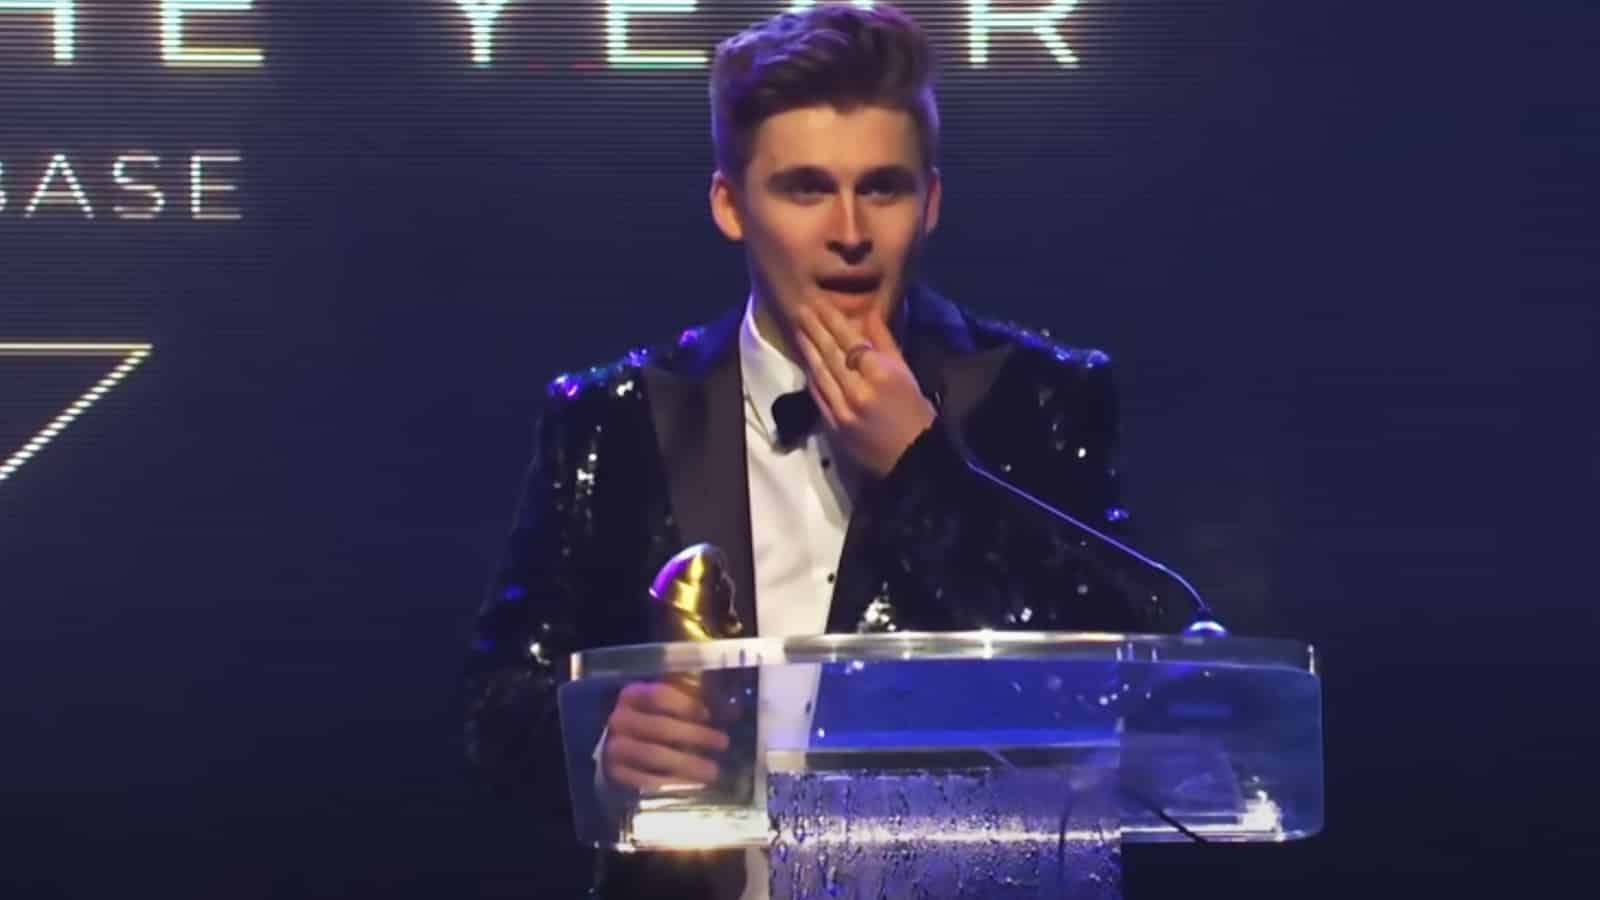 YouTuber Ludwig accepting streamer of the year at the Streamer Awards screenshot.